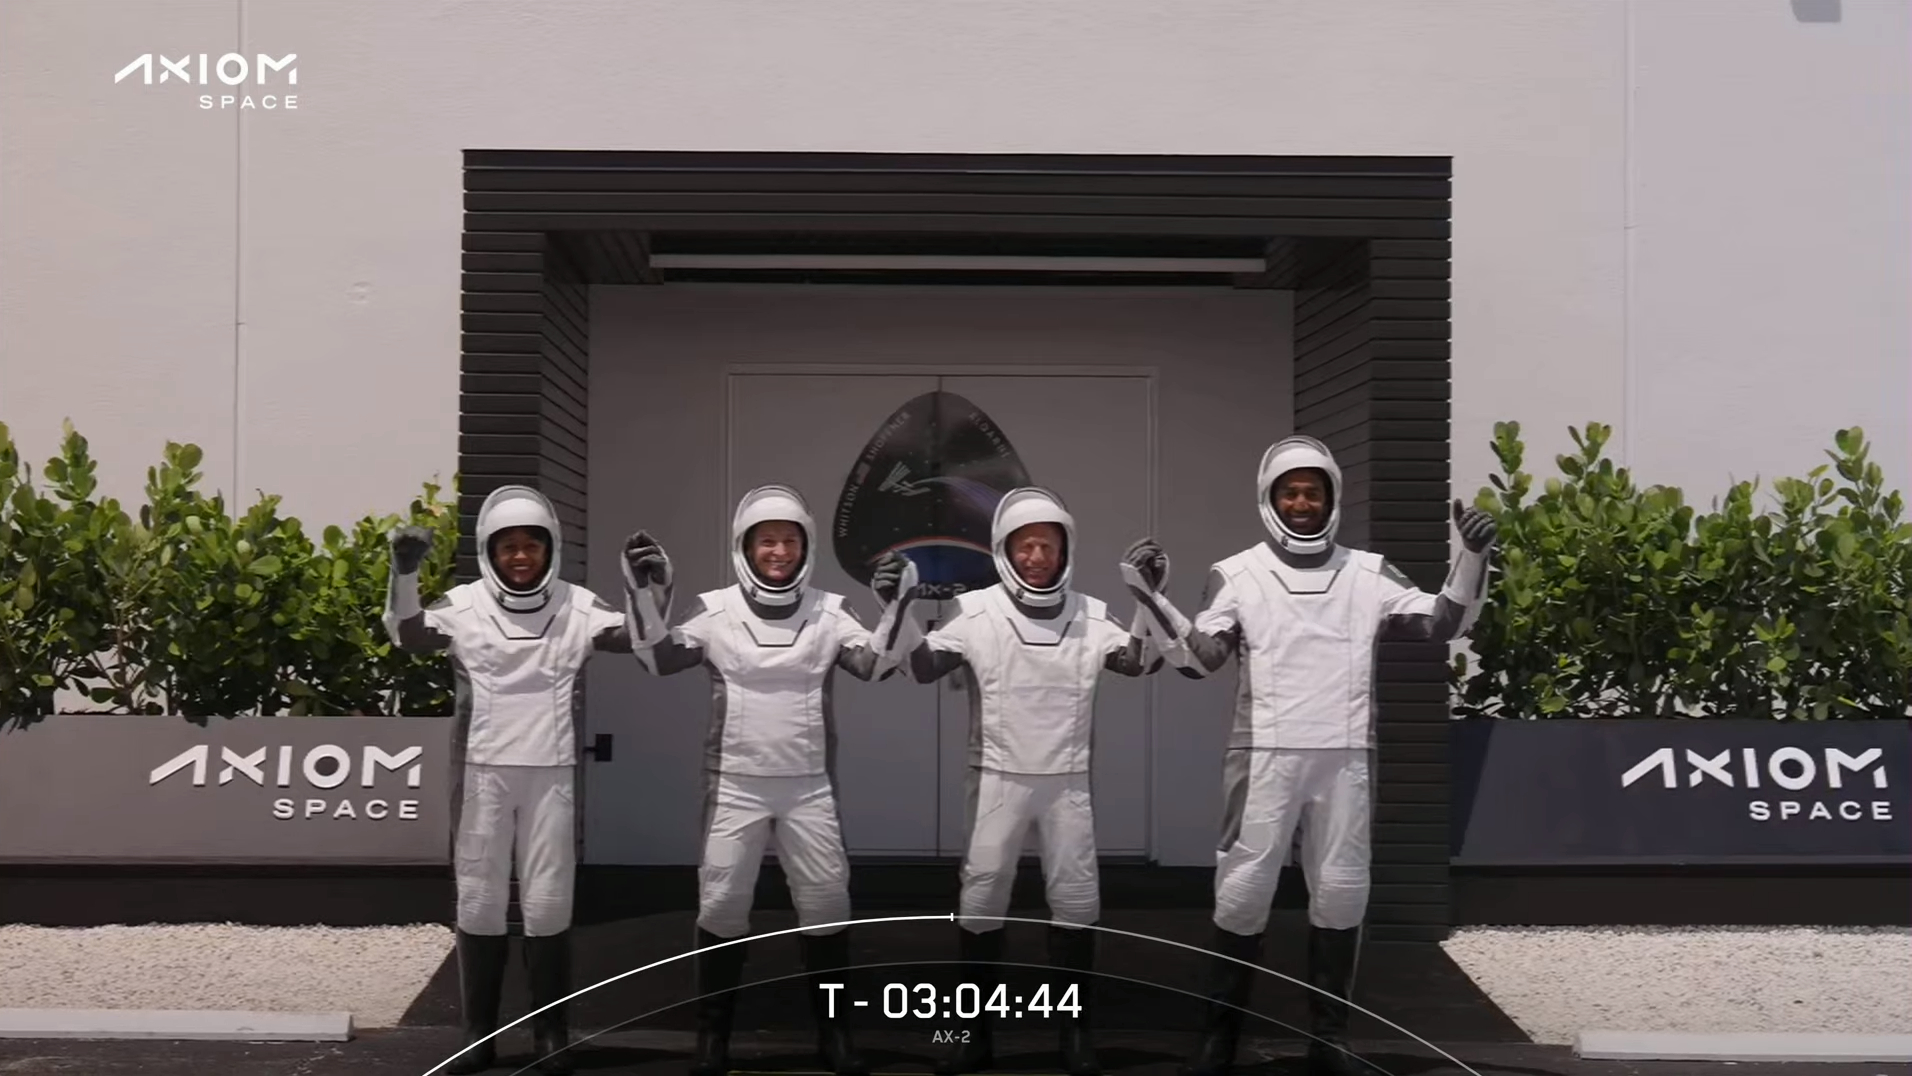 Ax-2 astronauts with their linked hands raised as they walkout in spacesuits